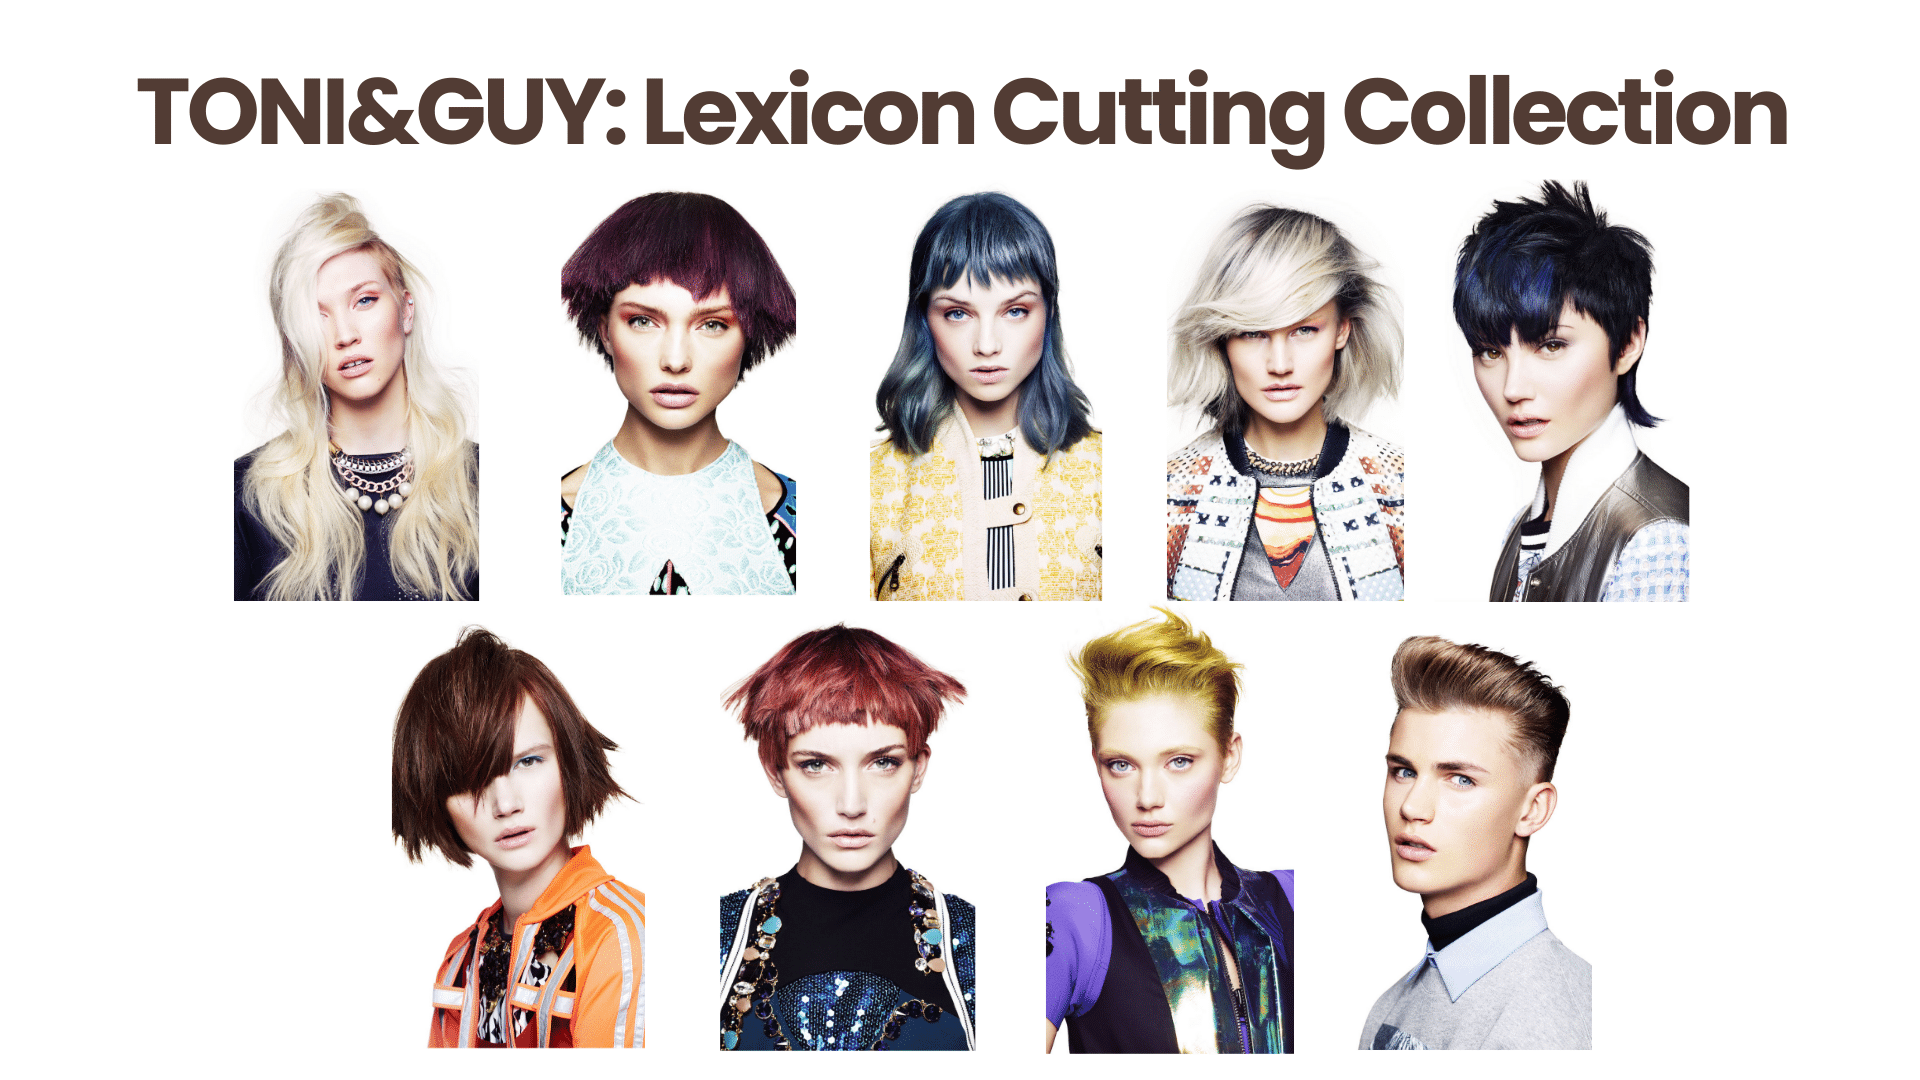 TONI&GUY: Lexicon Cutting Collection